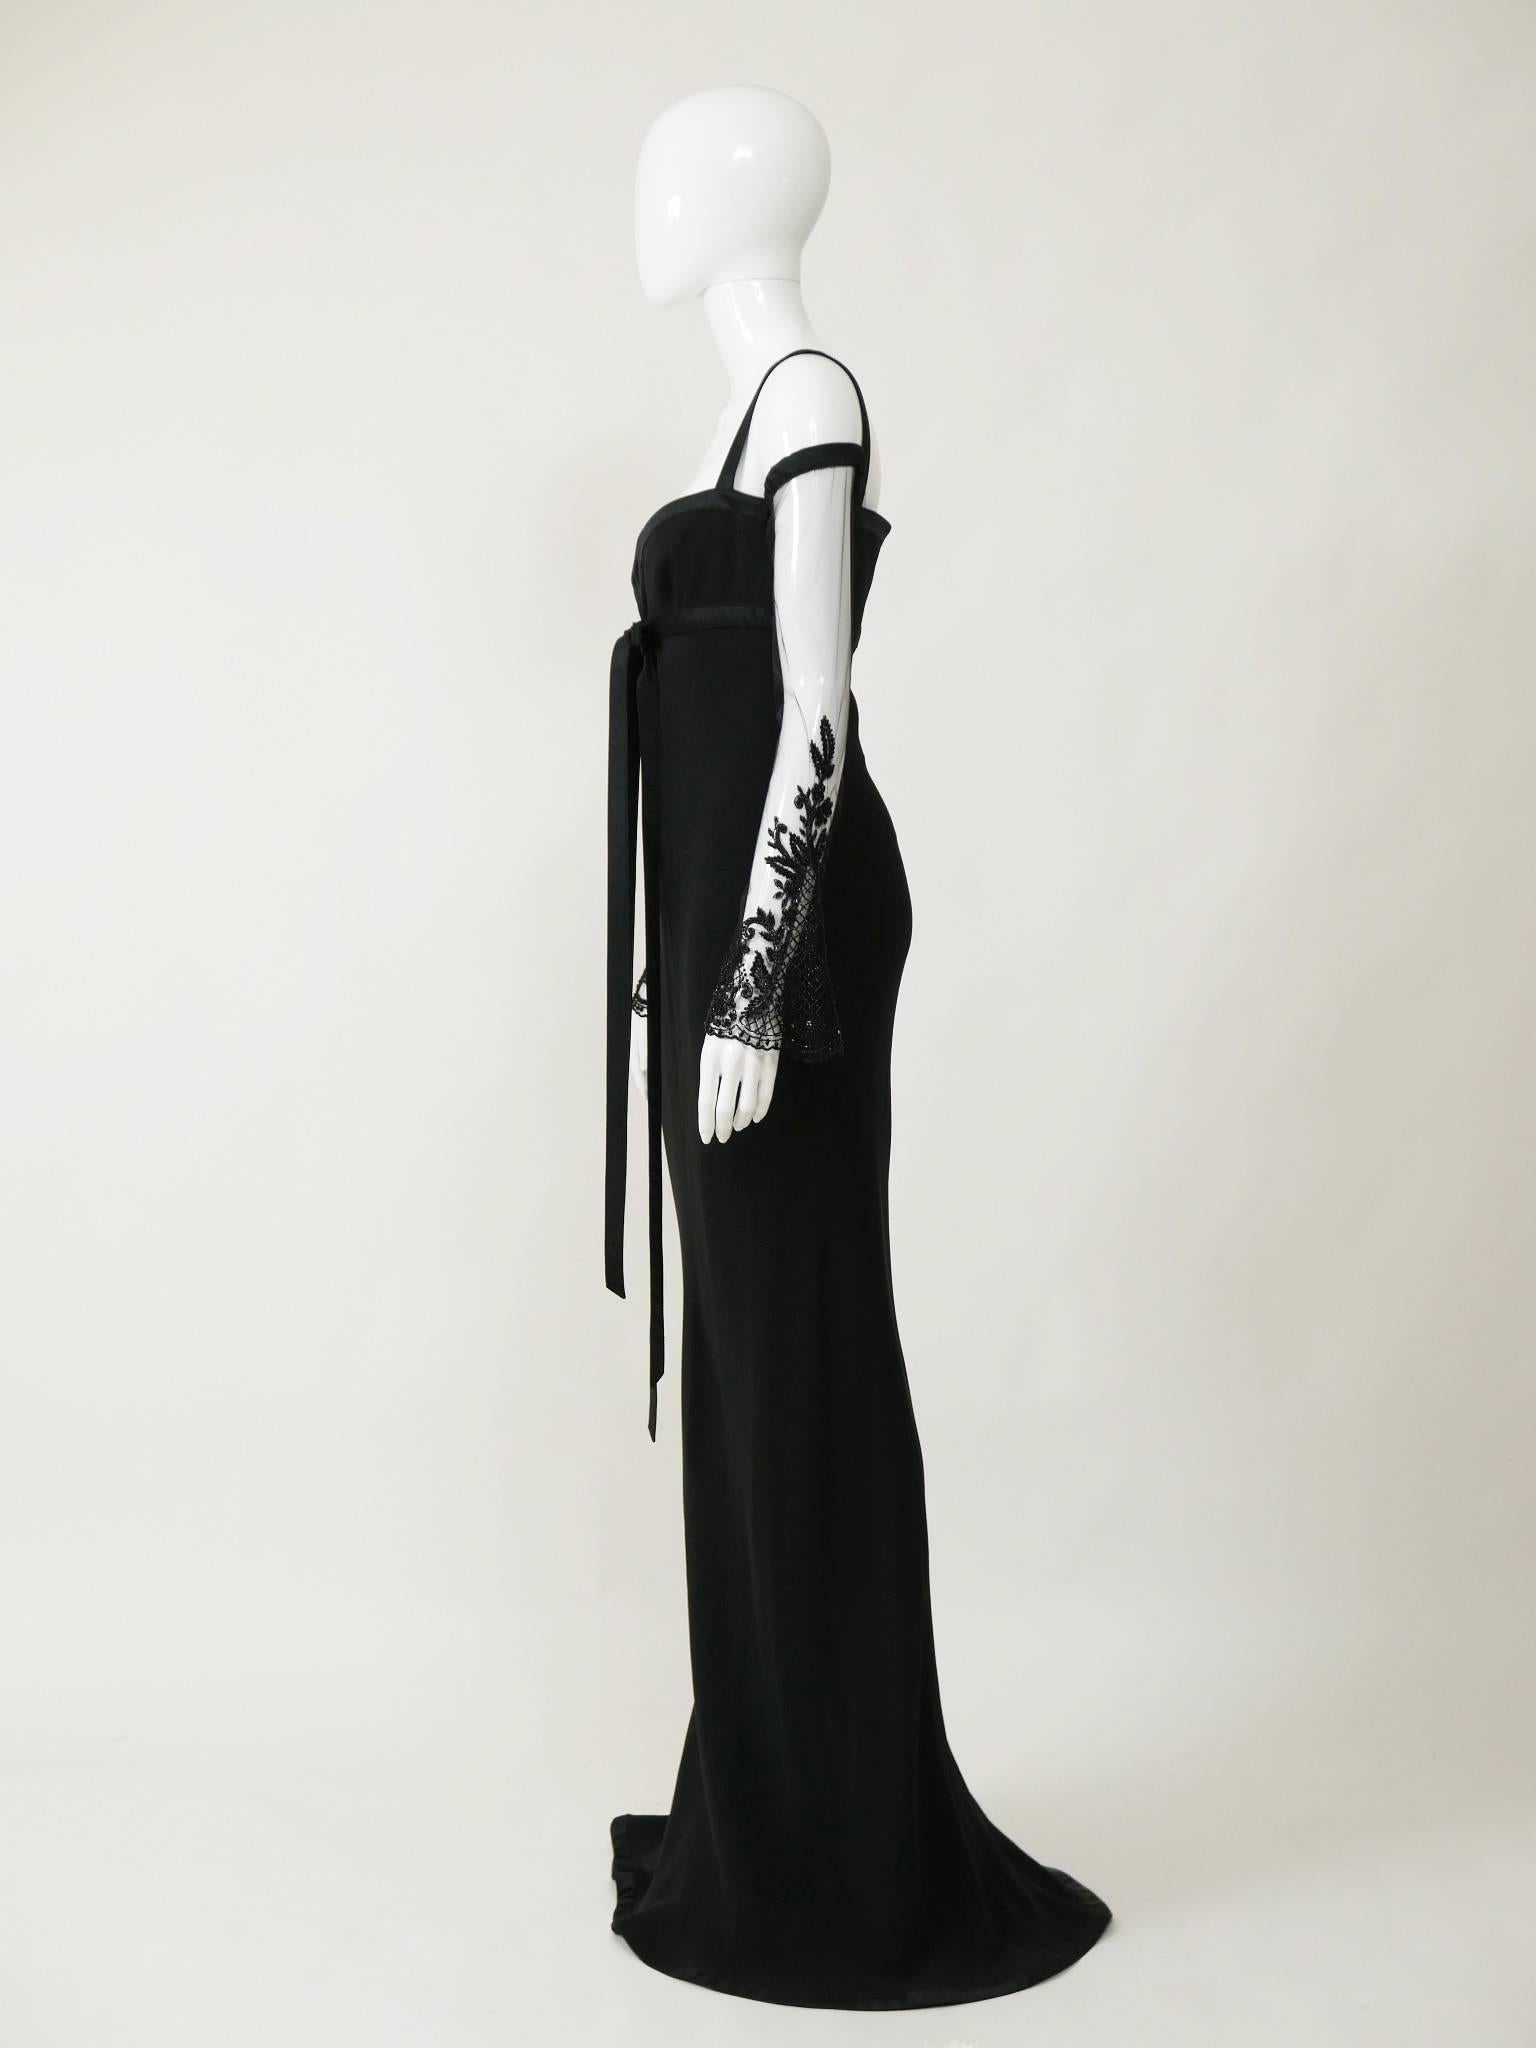 This stunning Valentino long dress is made of black crepe silk fabric. It has long sheer tulle embroidered sleeves, boning bust, shoulder straps and back zip closure. 

Measurements:
Label size 6 USA
Estimated size S
Bust 34 inch
Sleeve 21